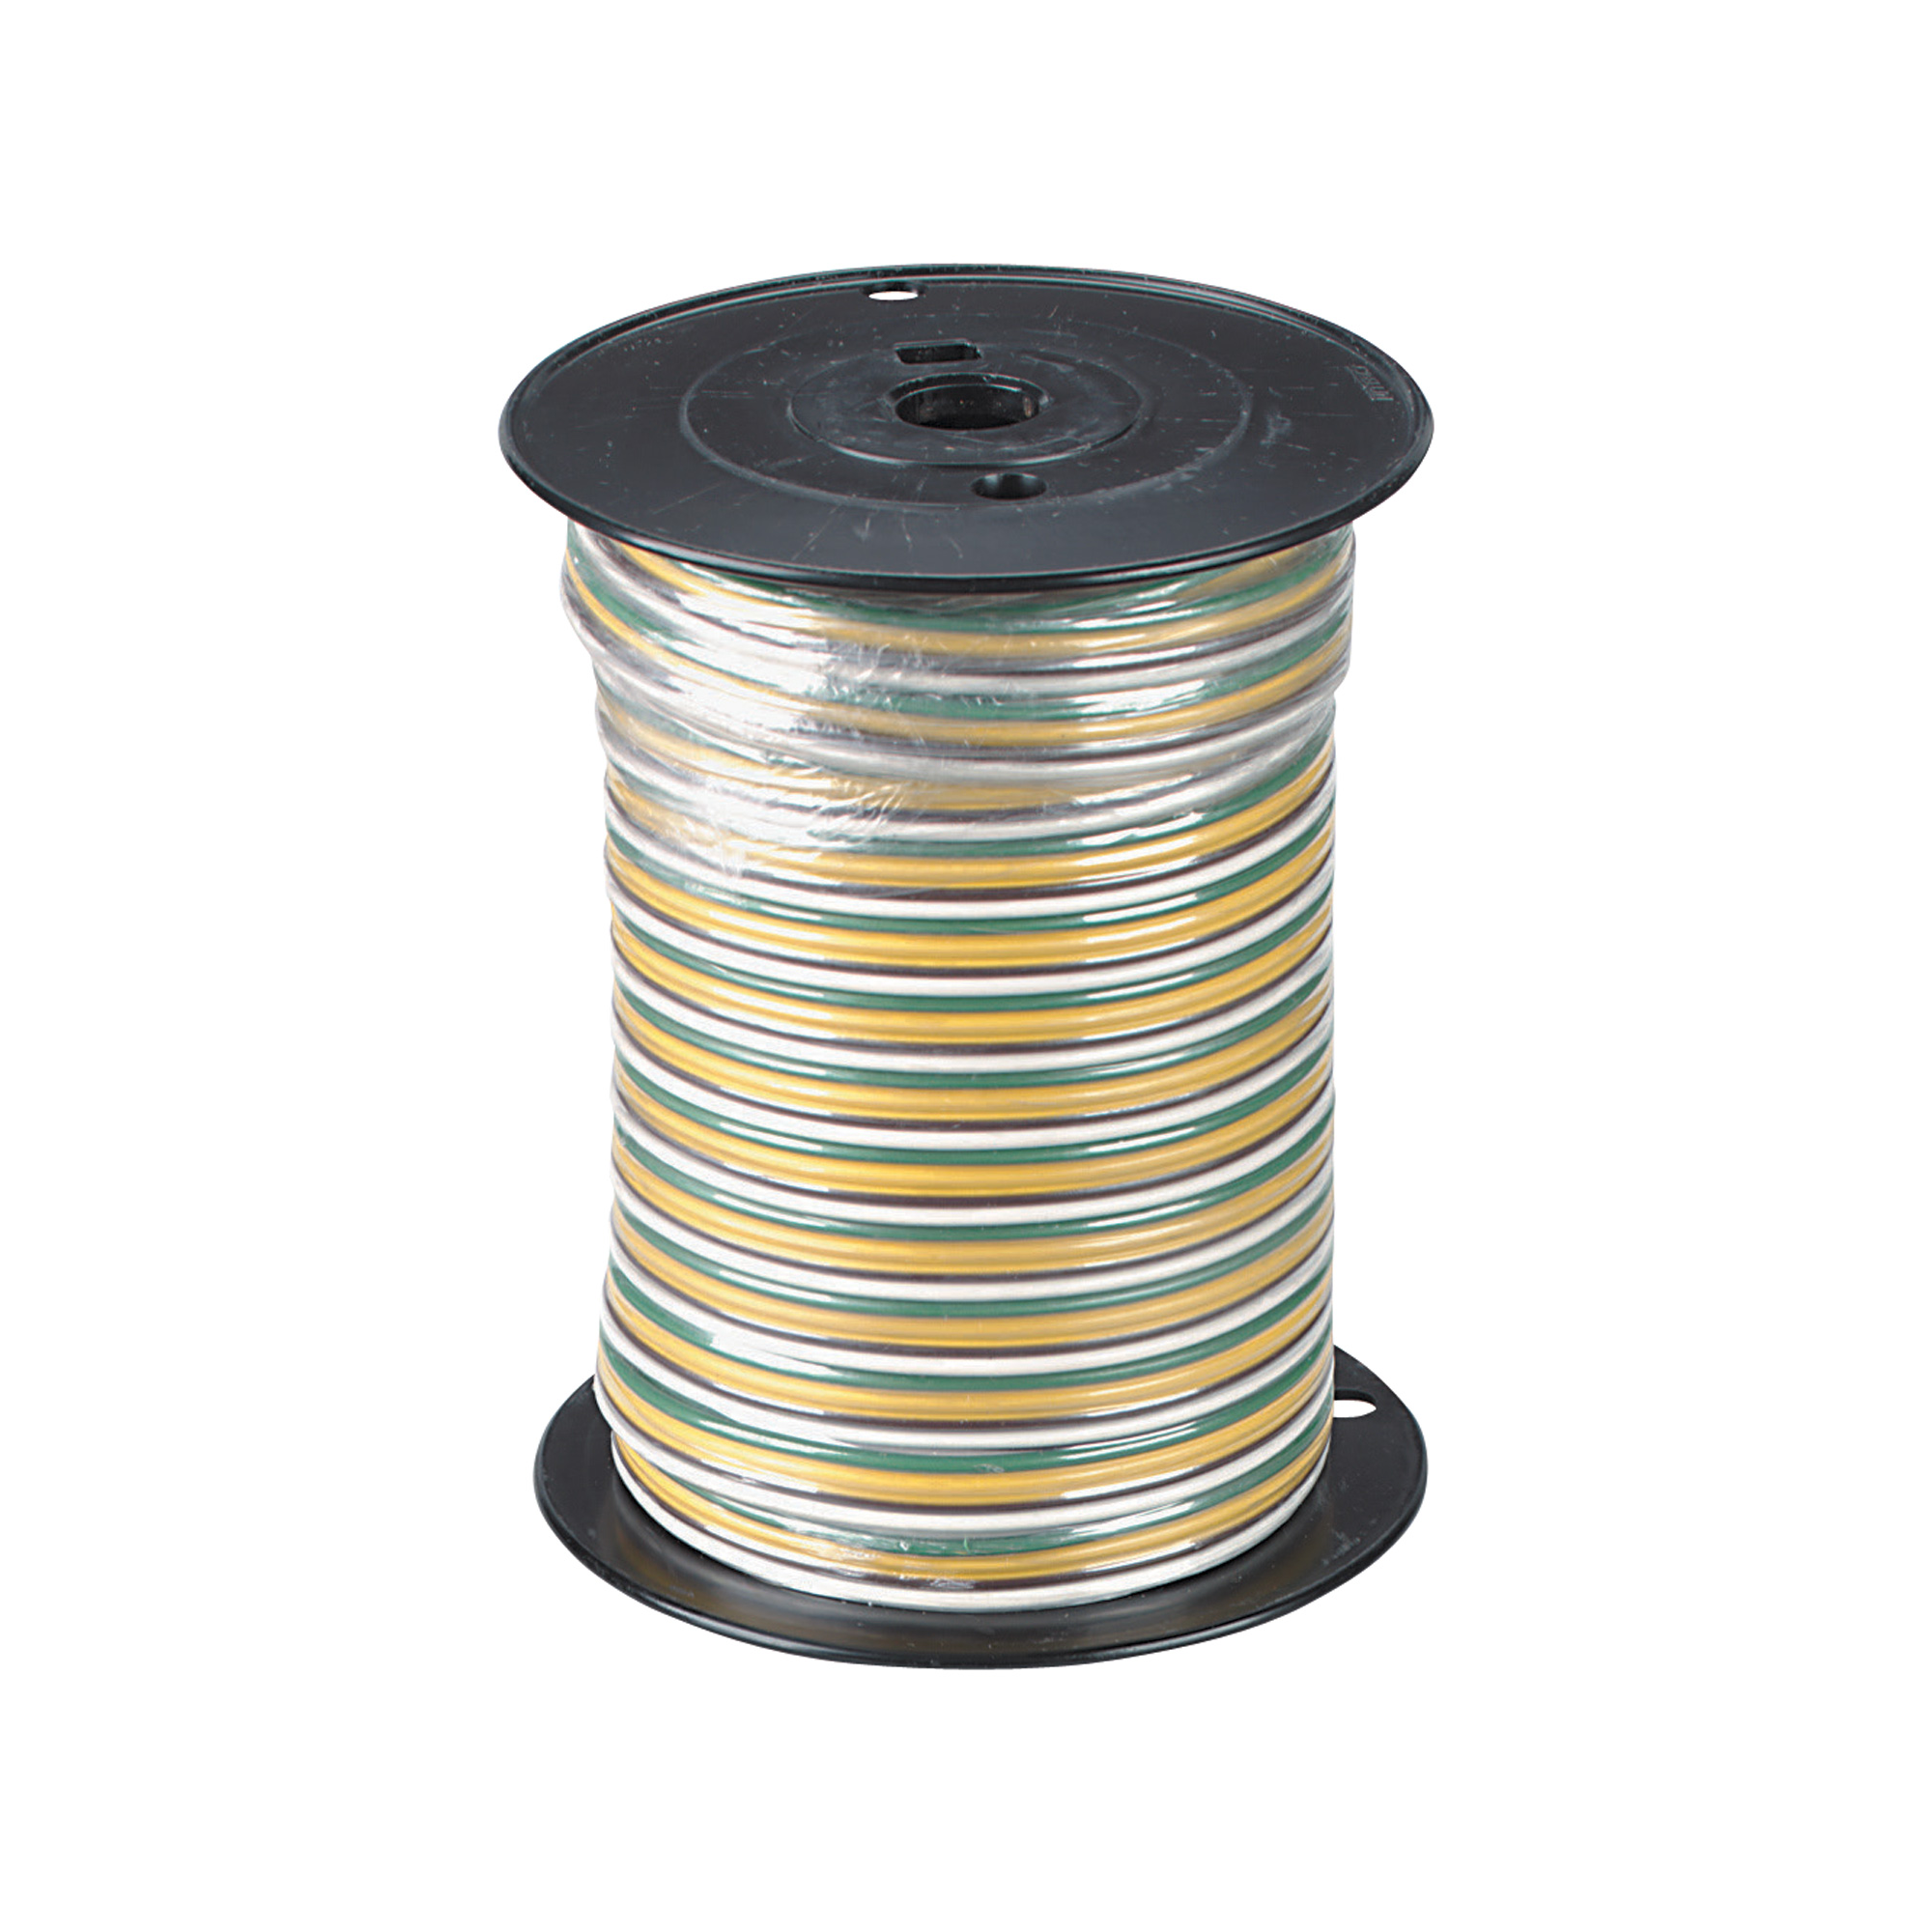 We order wire in bulk to re-wire anything